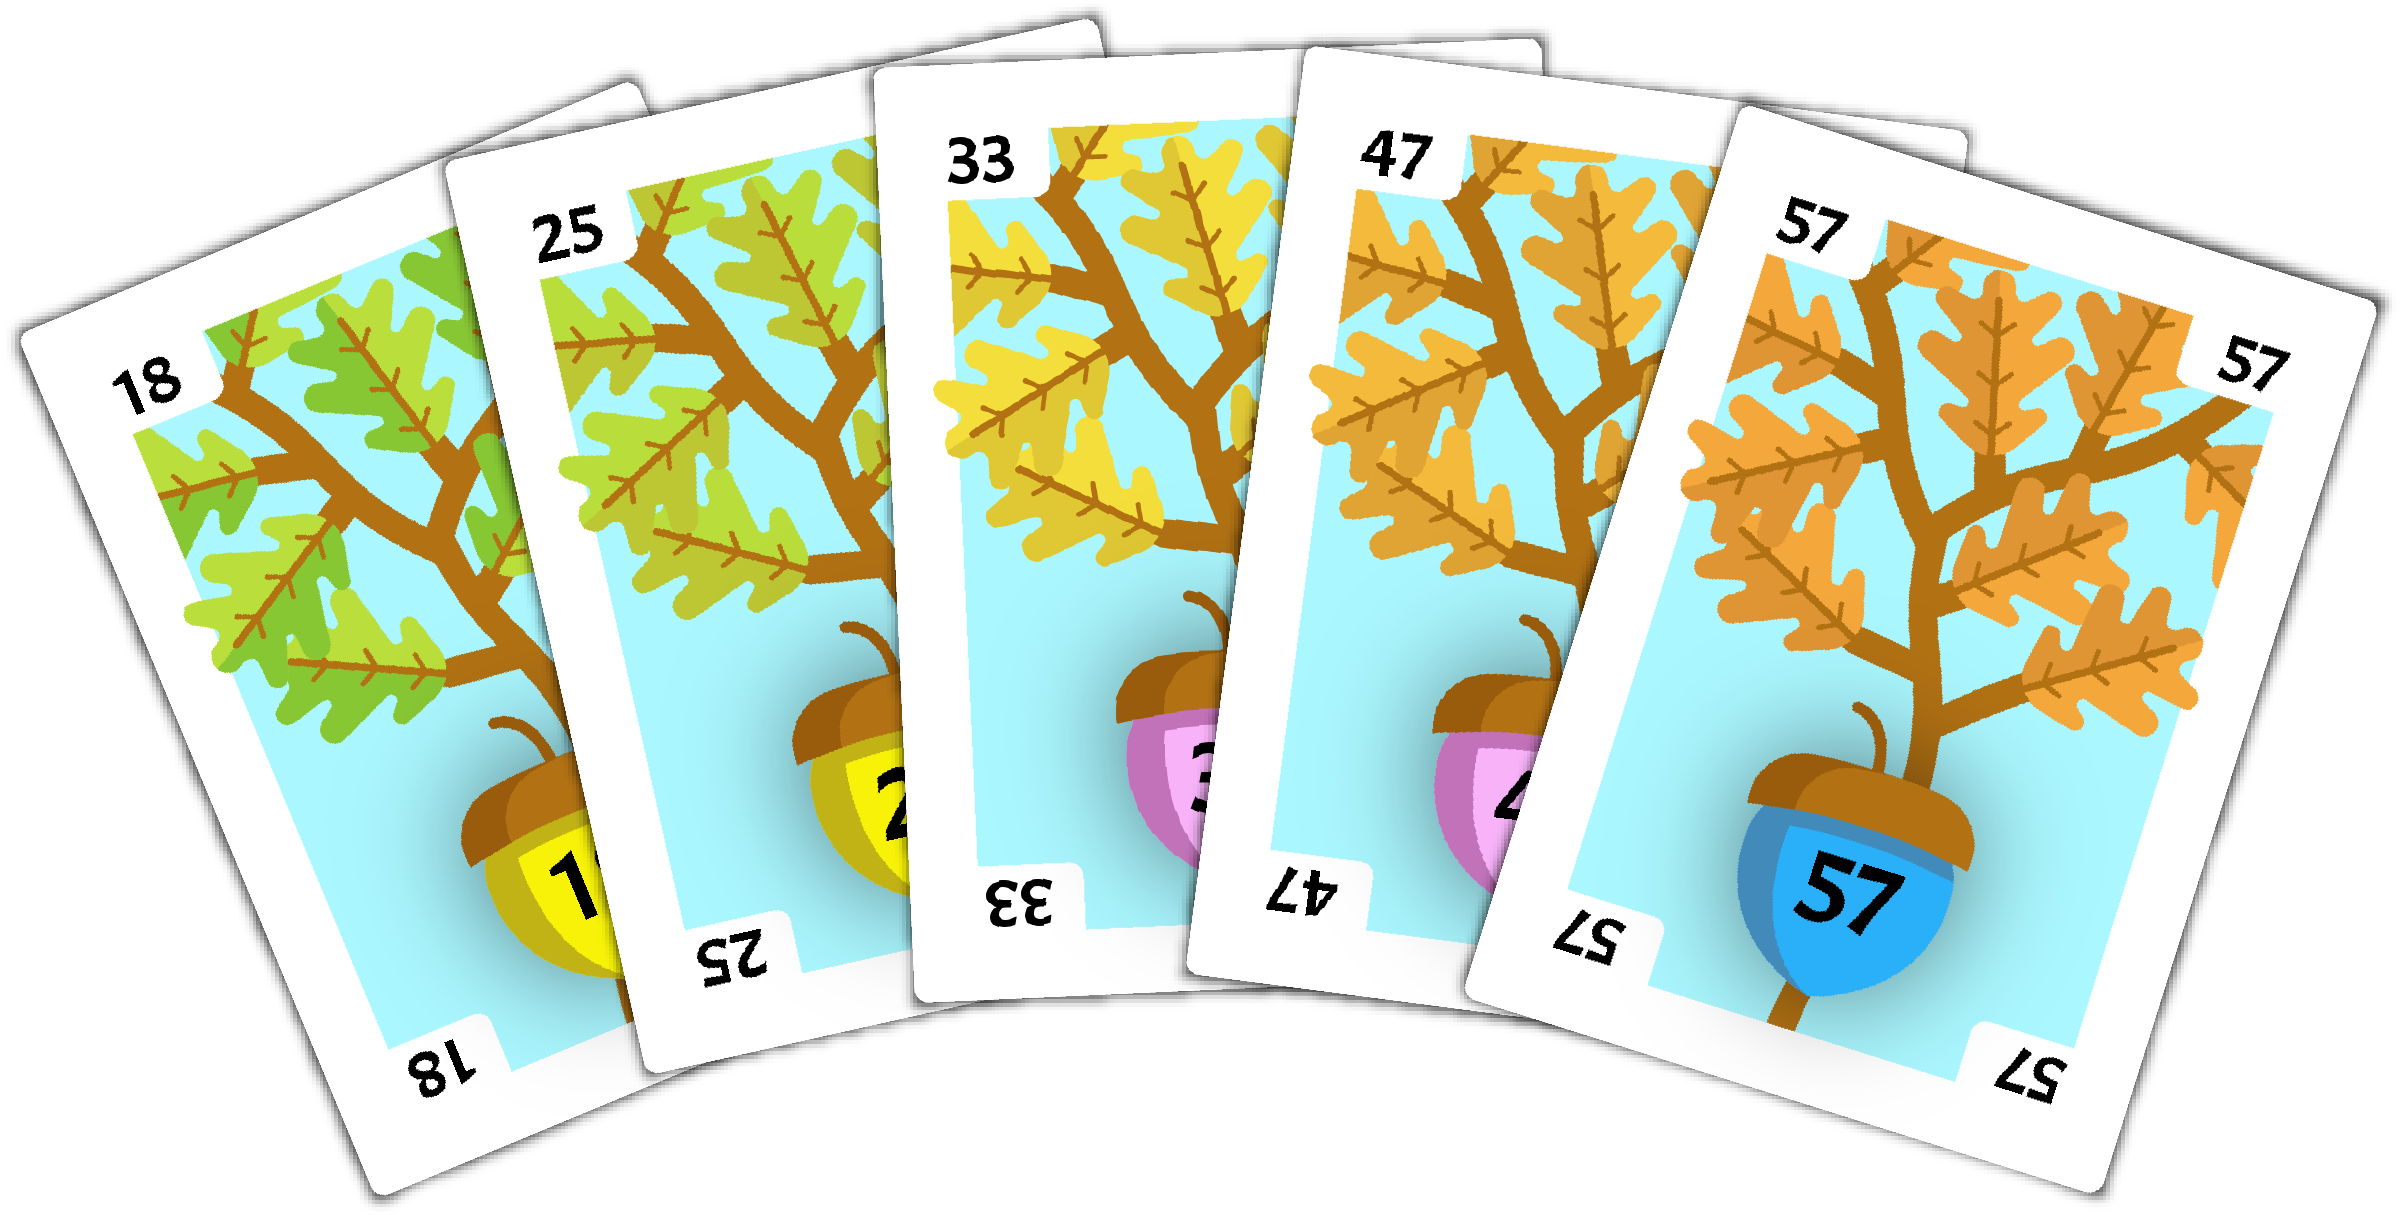 Sample cards from the Acorn deck.